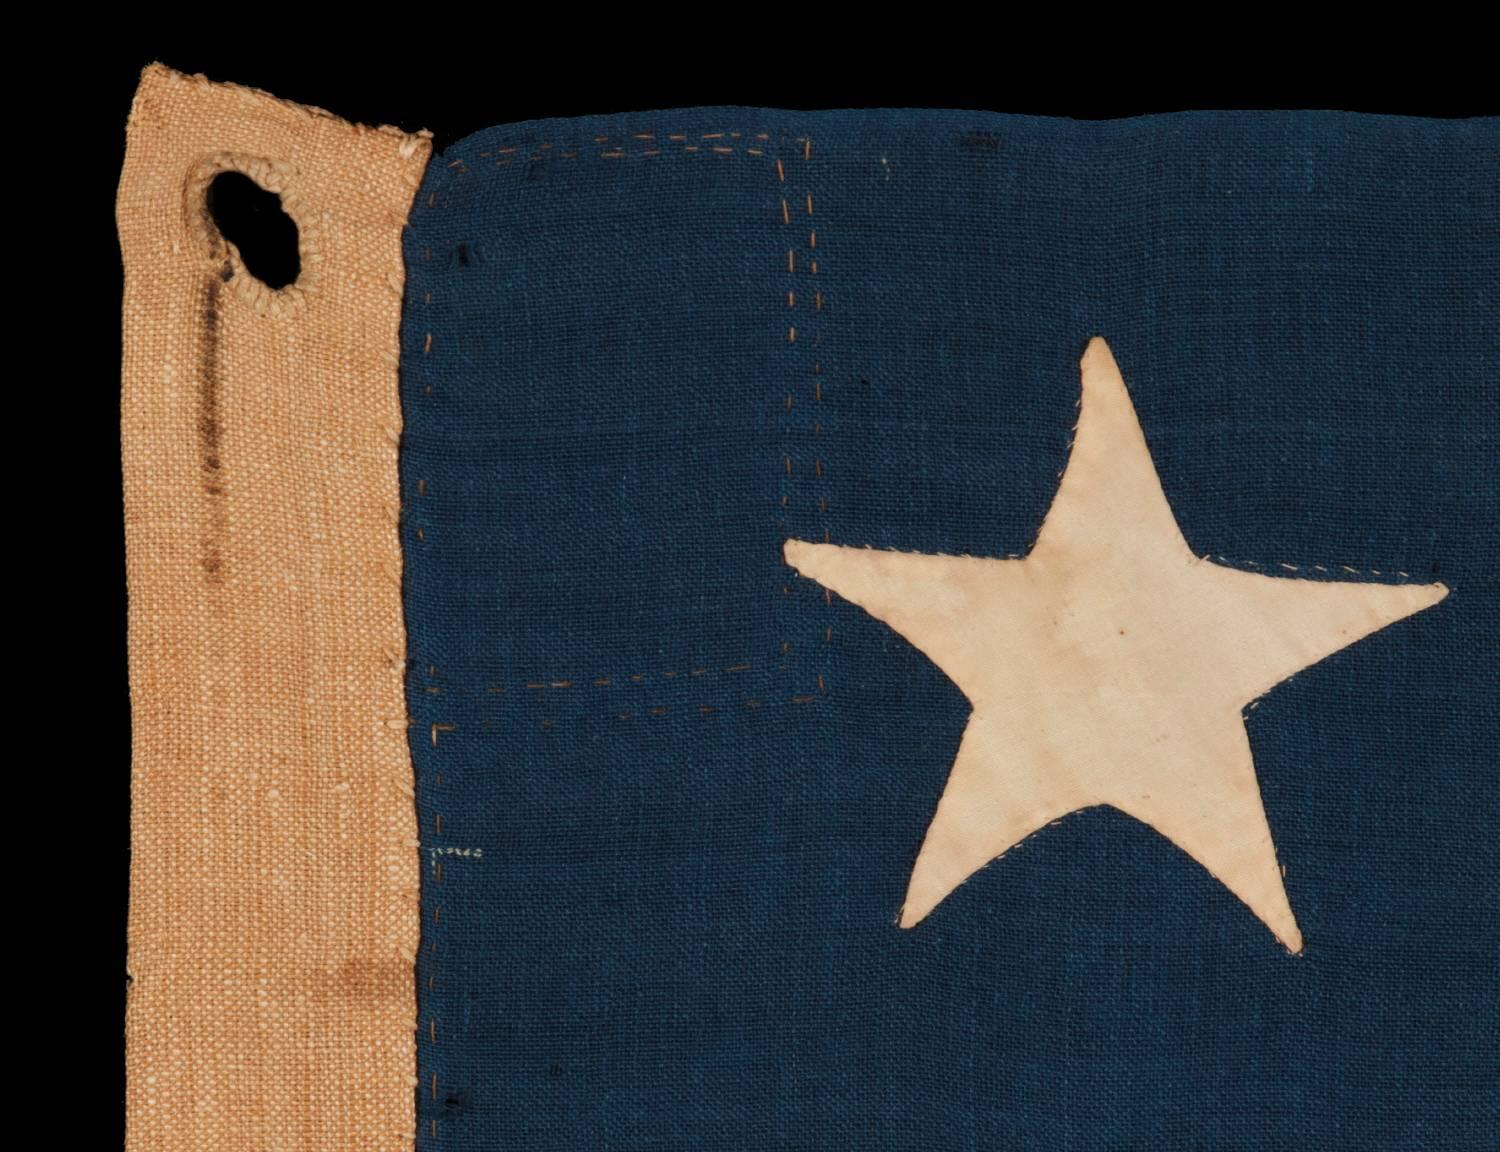 13 Stars on a U.S Navy Small Boat Ensign, Entirely Hand-Sewn 1